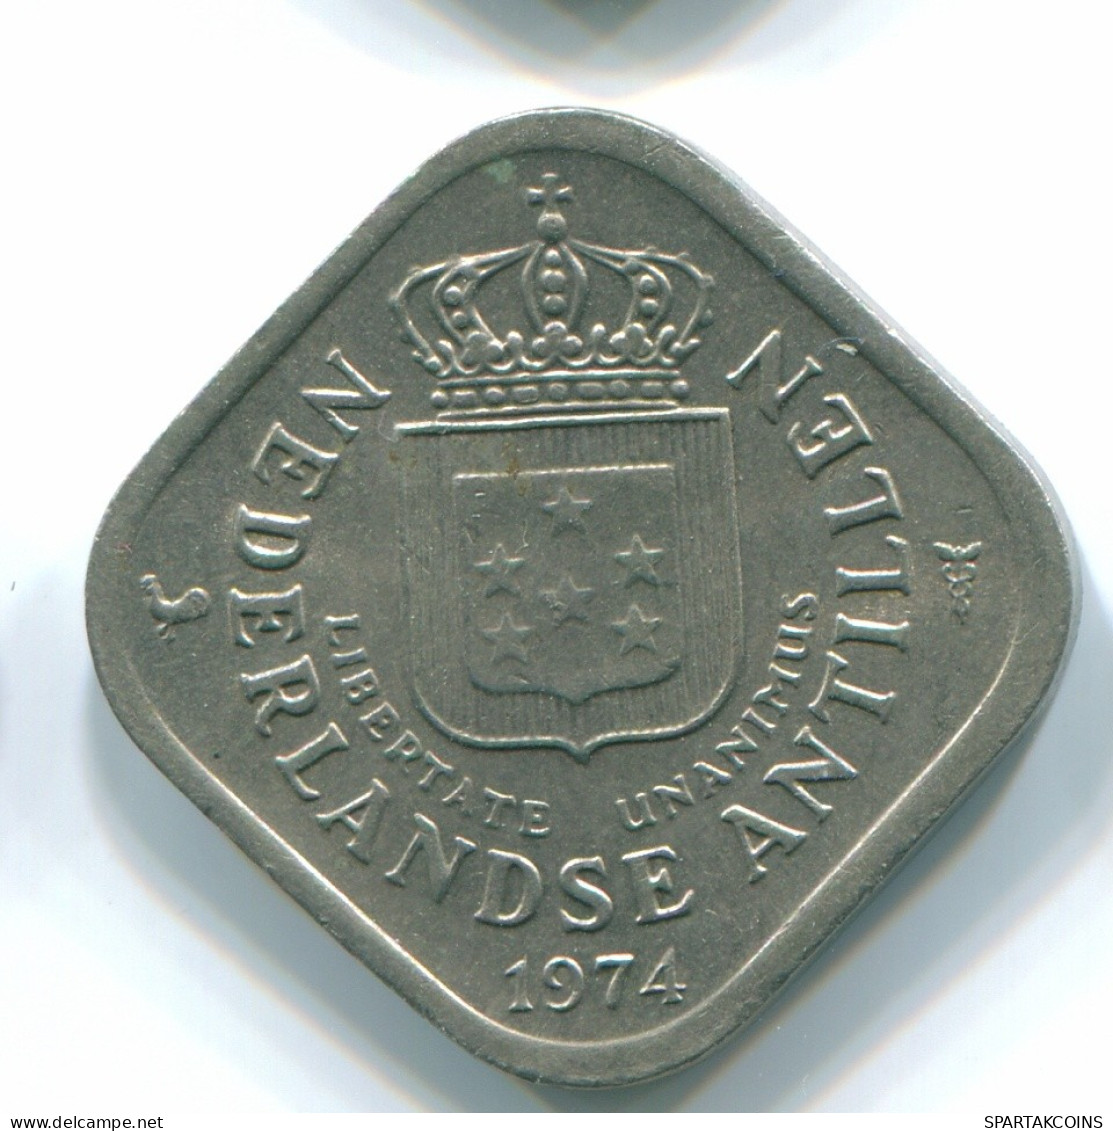 5 CENTS 1974 NETHERLANDS ANTILLES Nickel Colonial Coin #S12210.U.A - Antille Olandesi